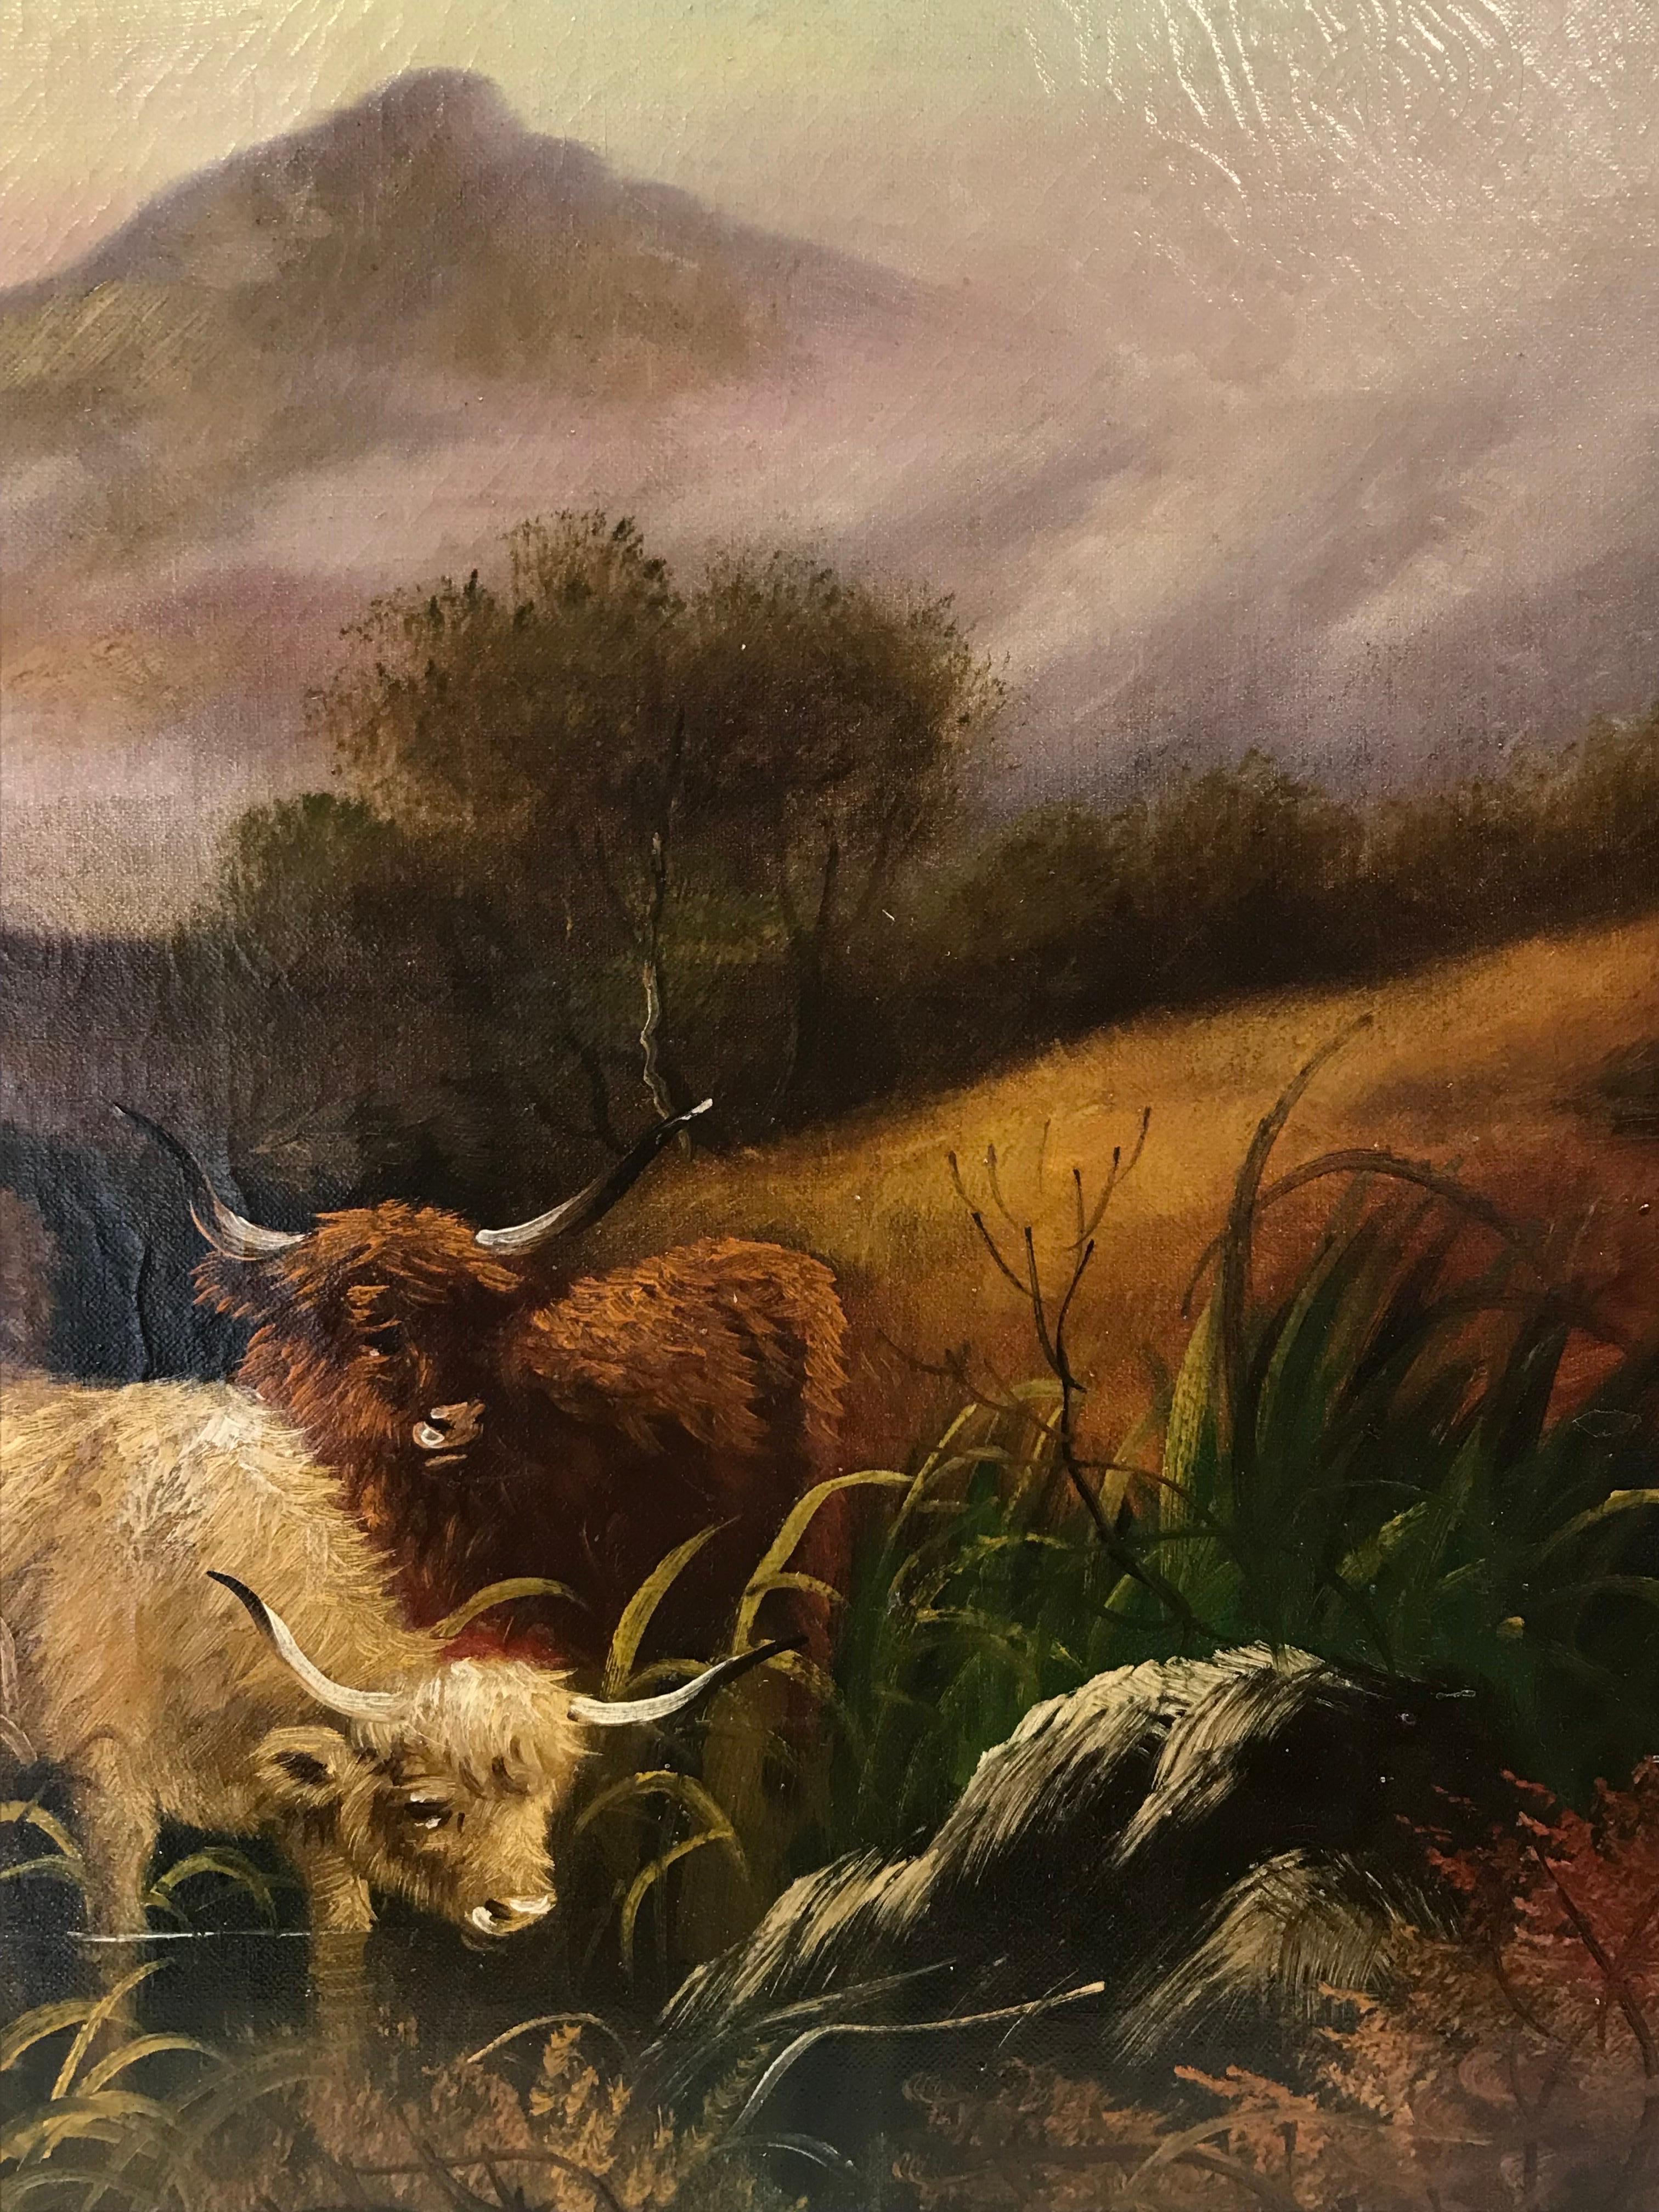 Artist/ School: W. Grey, Scottish late 19th century, signed lower front

Title: Highland Cattle in a Scottish Landscape, watering from the bank of the loch. 

Medium:  oil painting on canvas, unframed

canvas:   20 x 30 inches

Provenance: private